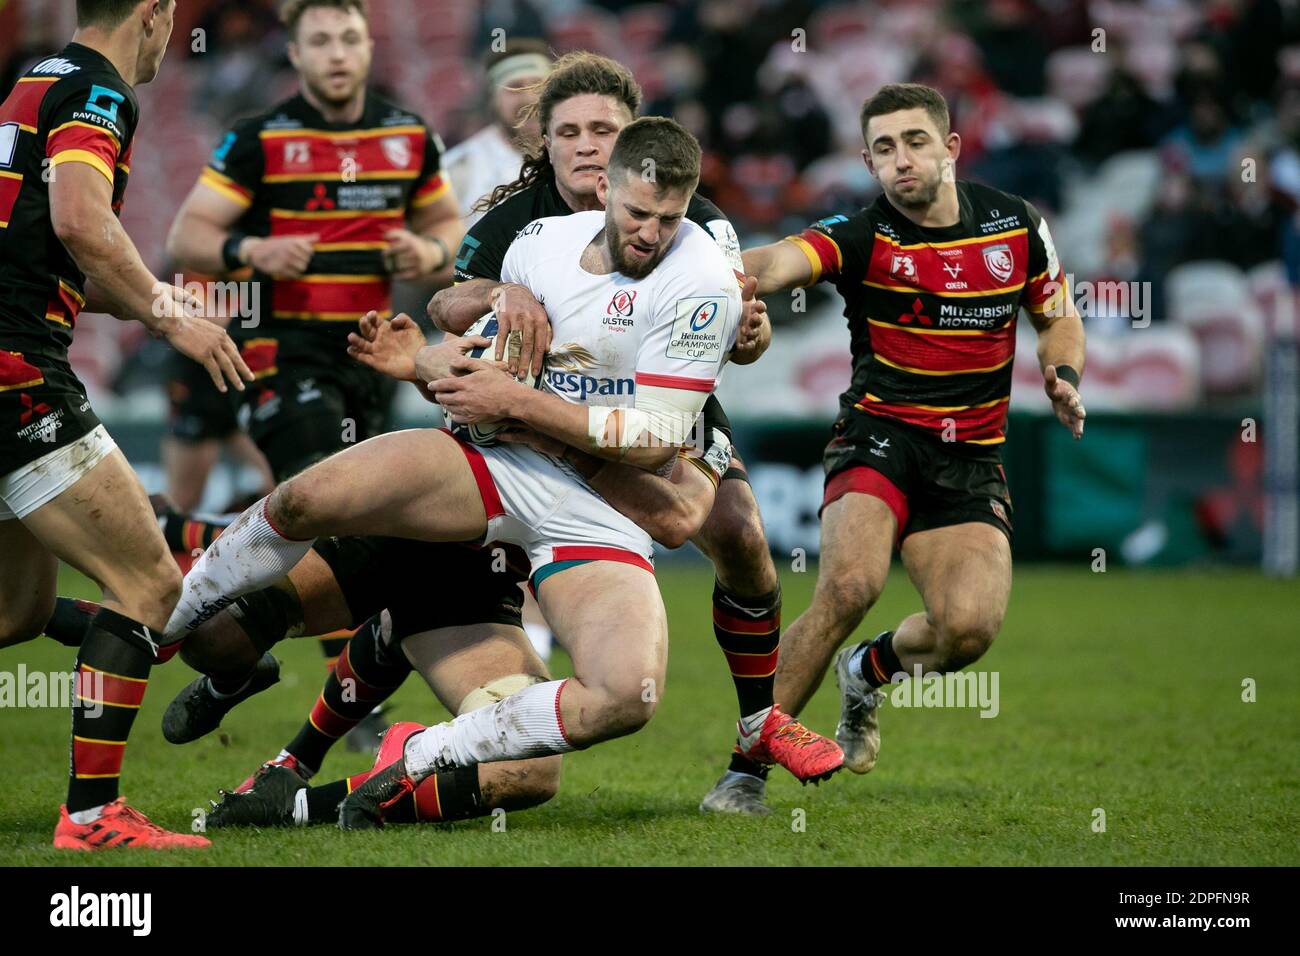 Stuart McCloskey of Ulster Rugby is tackled by Jordi Reid of Gloucester Rugby during the European Rugby Champions Cup match at Kingsholm Stadium, Gloucester (Photoby Juan Gasparini/Focus Images/Sipa USA) 19/12/2020 Credit Sipa